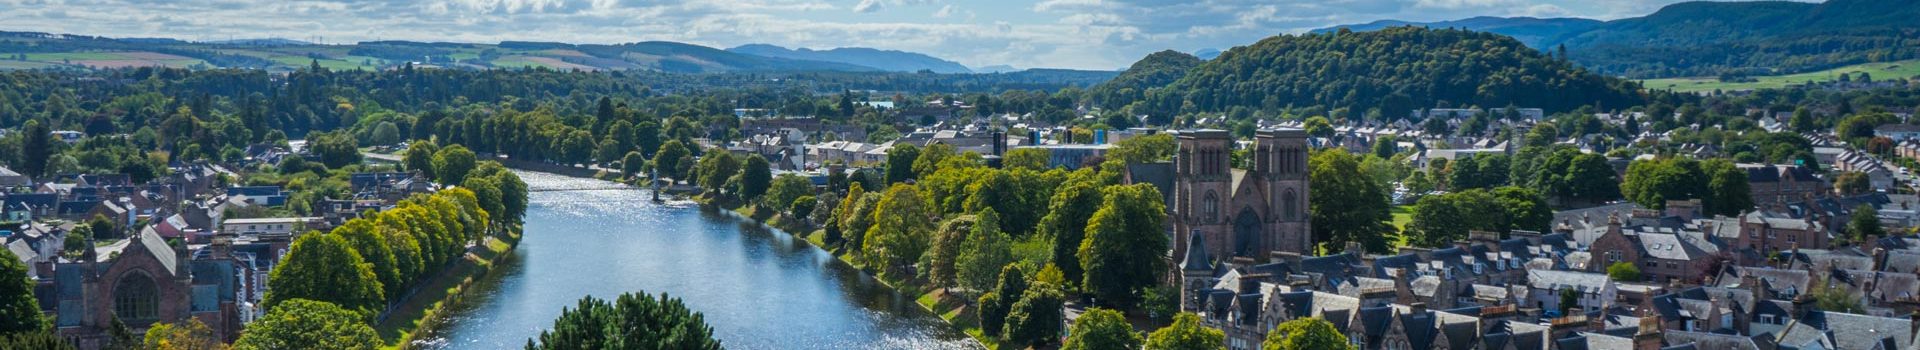 Aerial view of the River Ness in the city of Inverness, Scotland